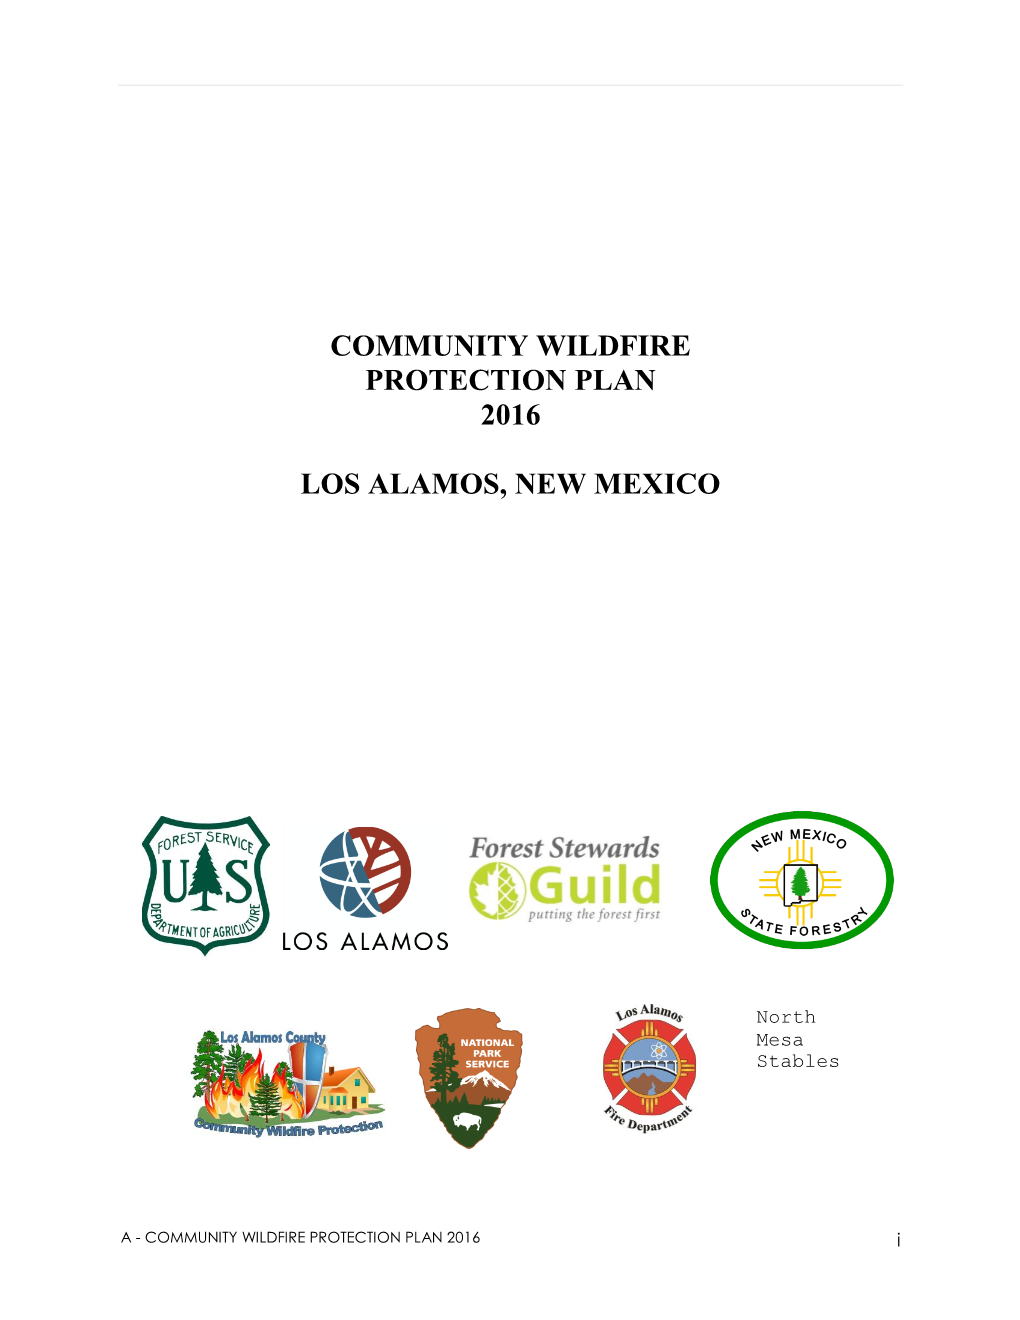 Community Wildfire Protection Plan (CWPP) Emphasizes